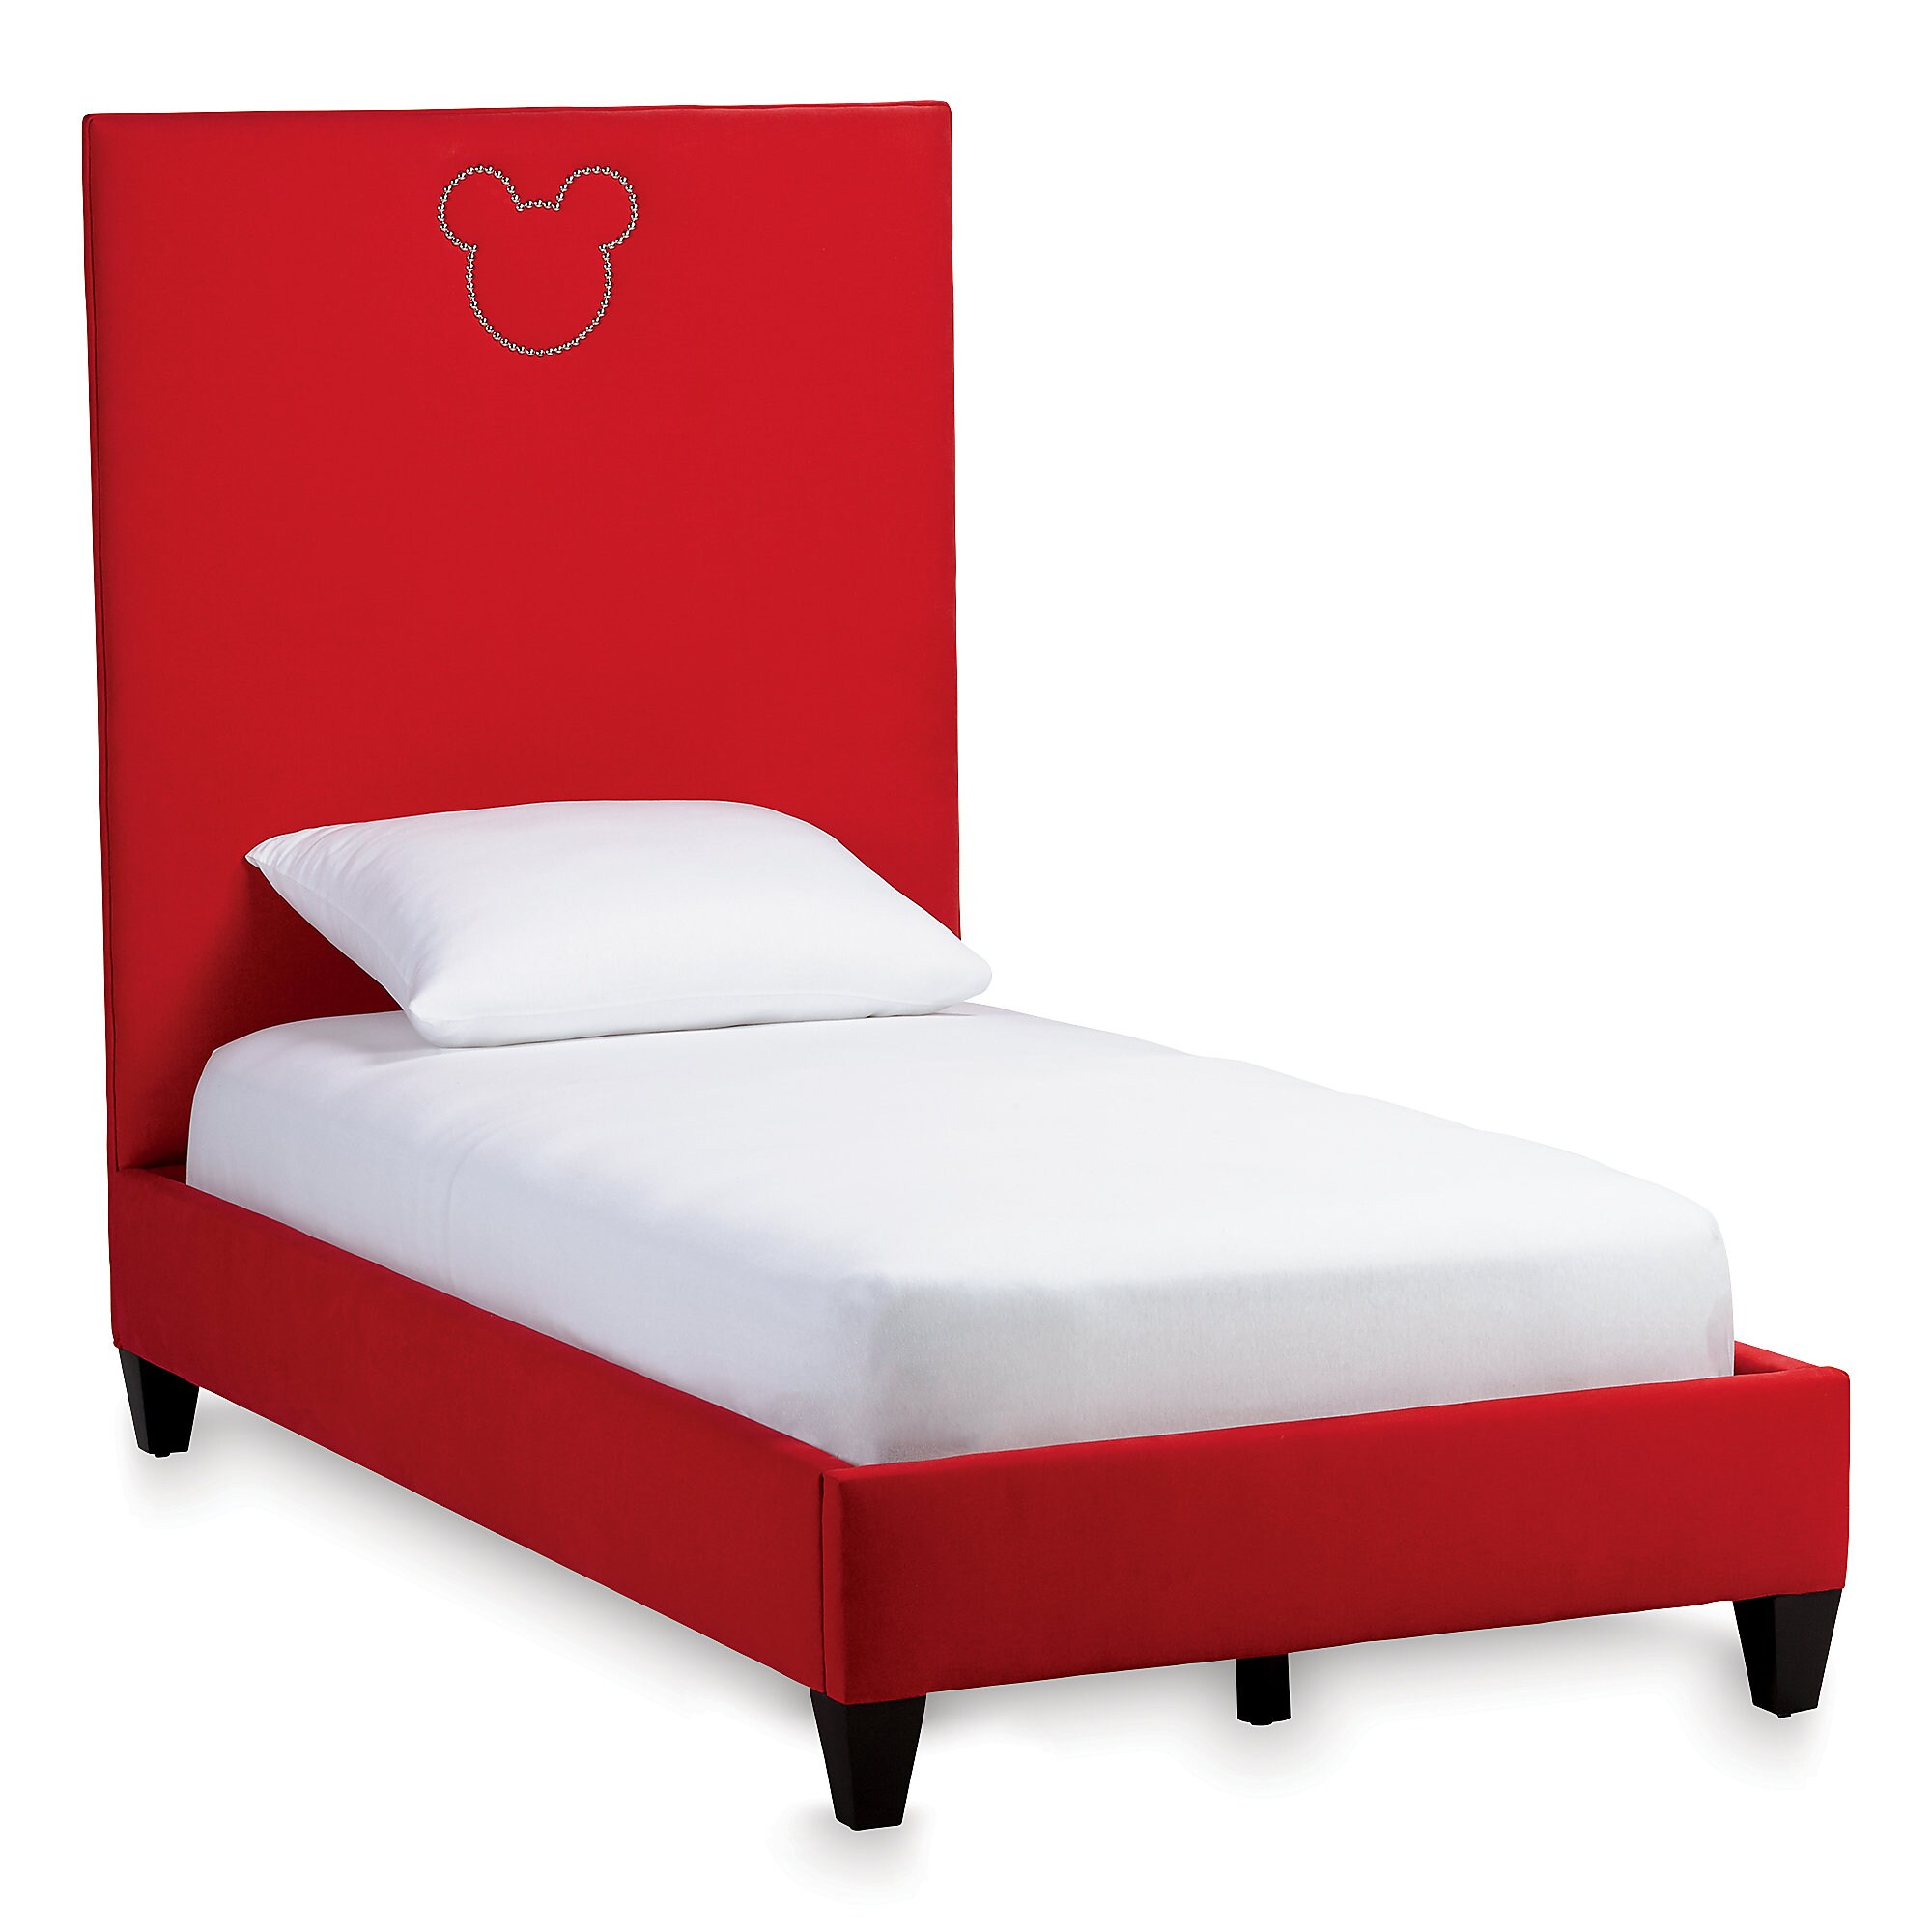 Mickey Mouse Holmby Bed by Ethan Allen is now available